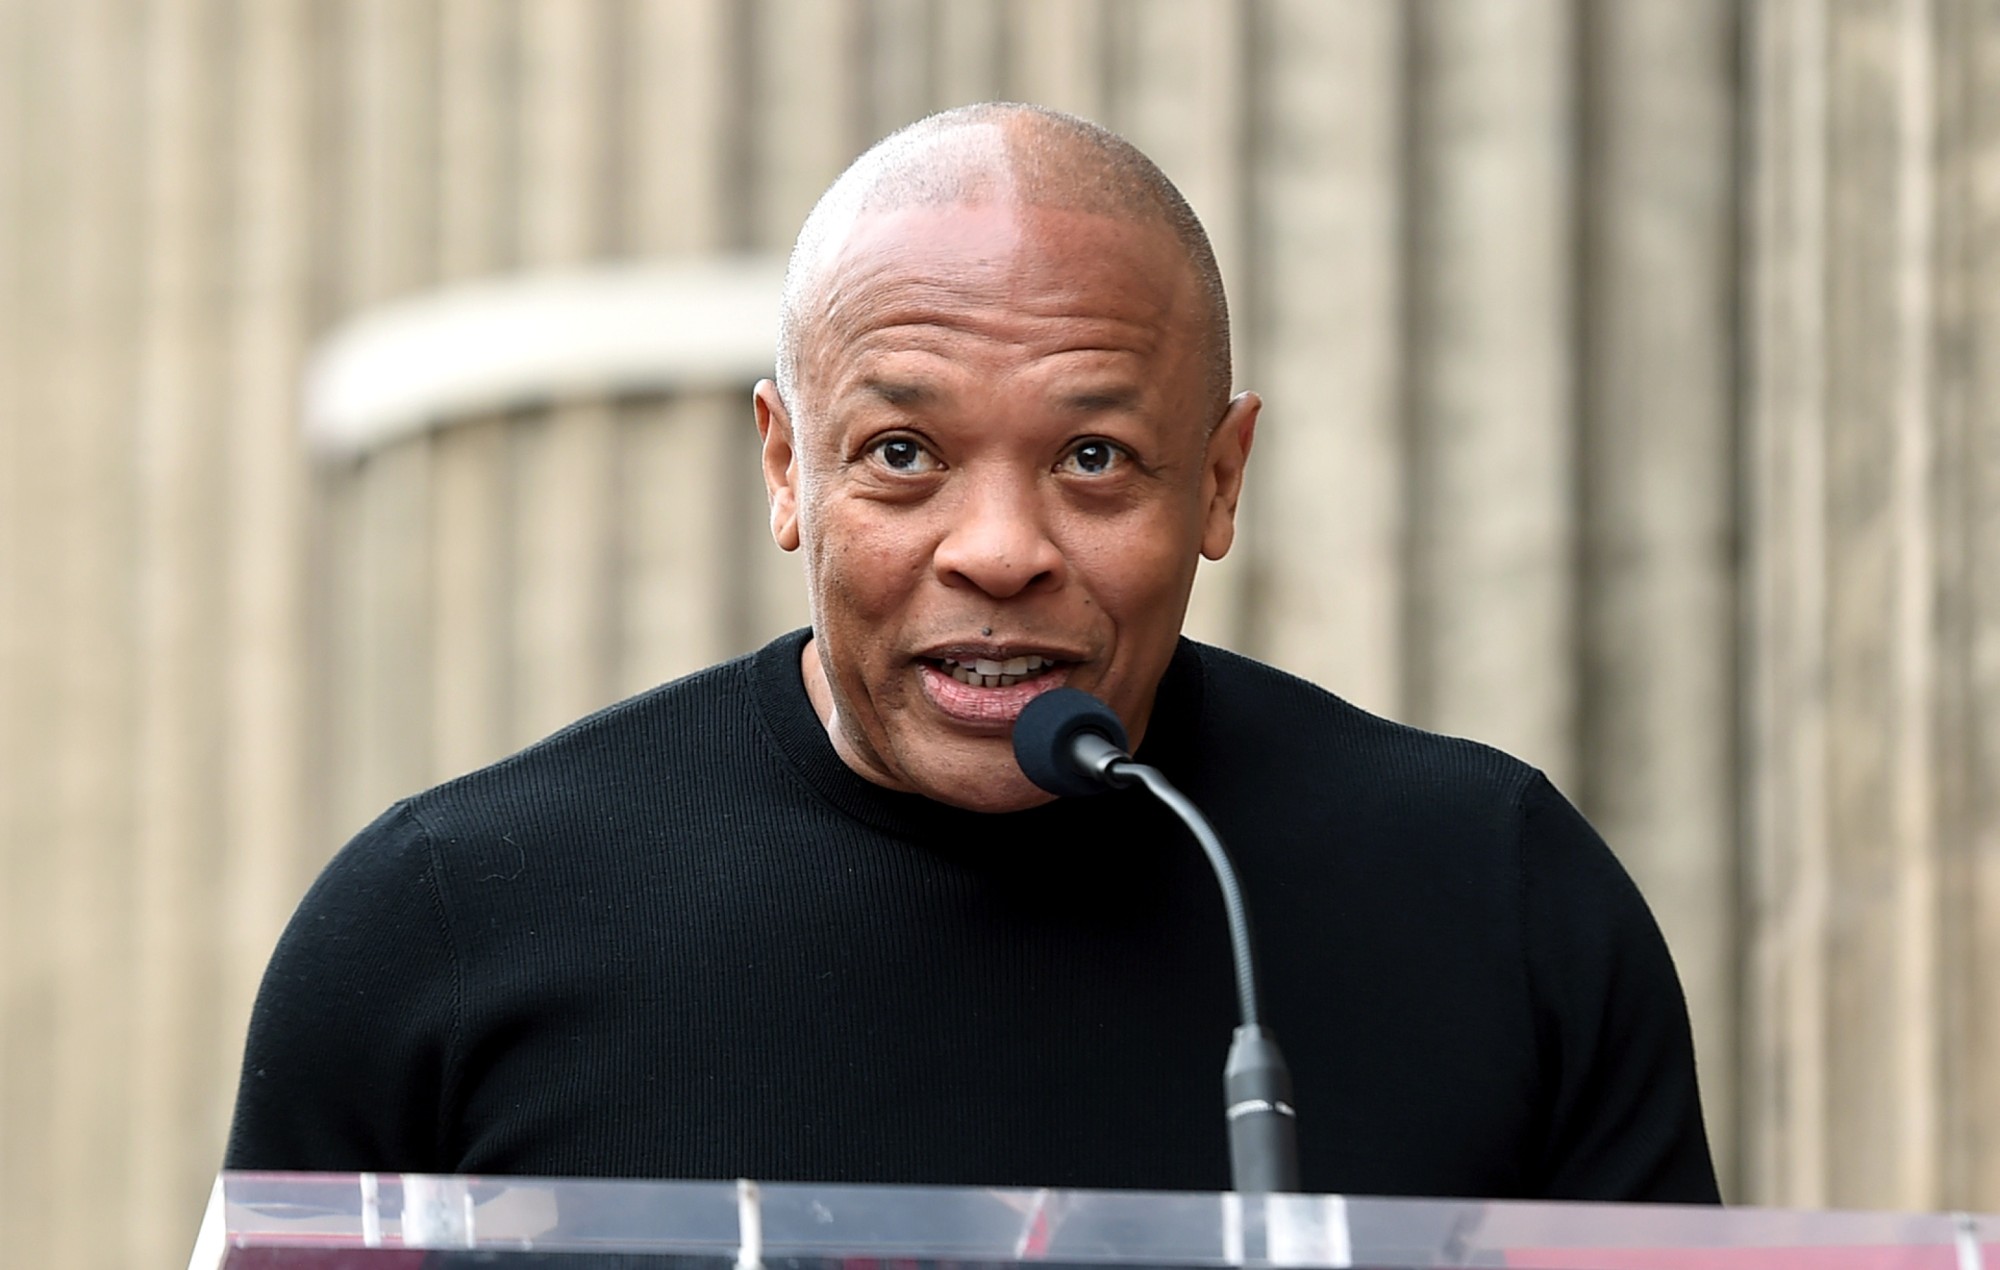 Dr. Dre speaking in front of a mic wearing black shirt